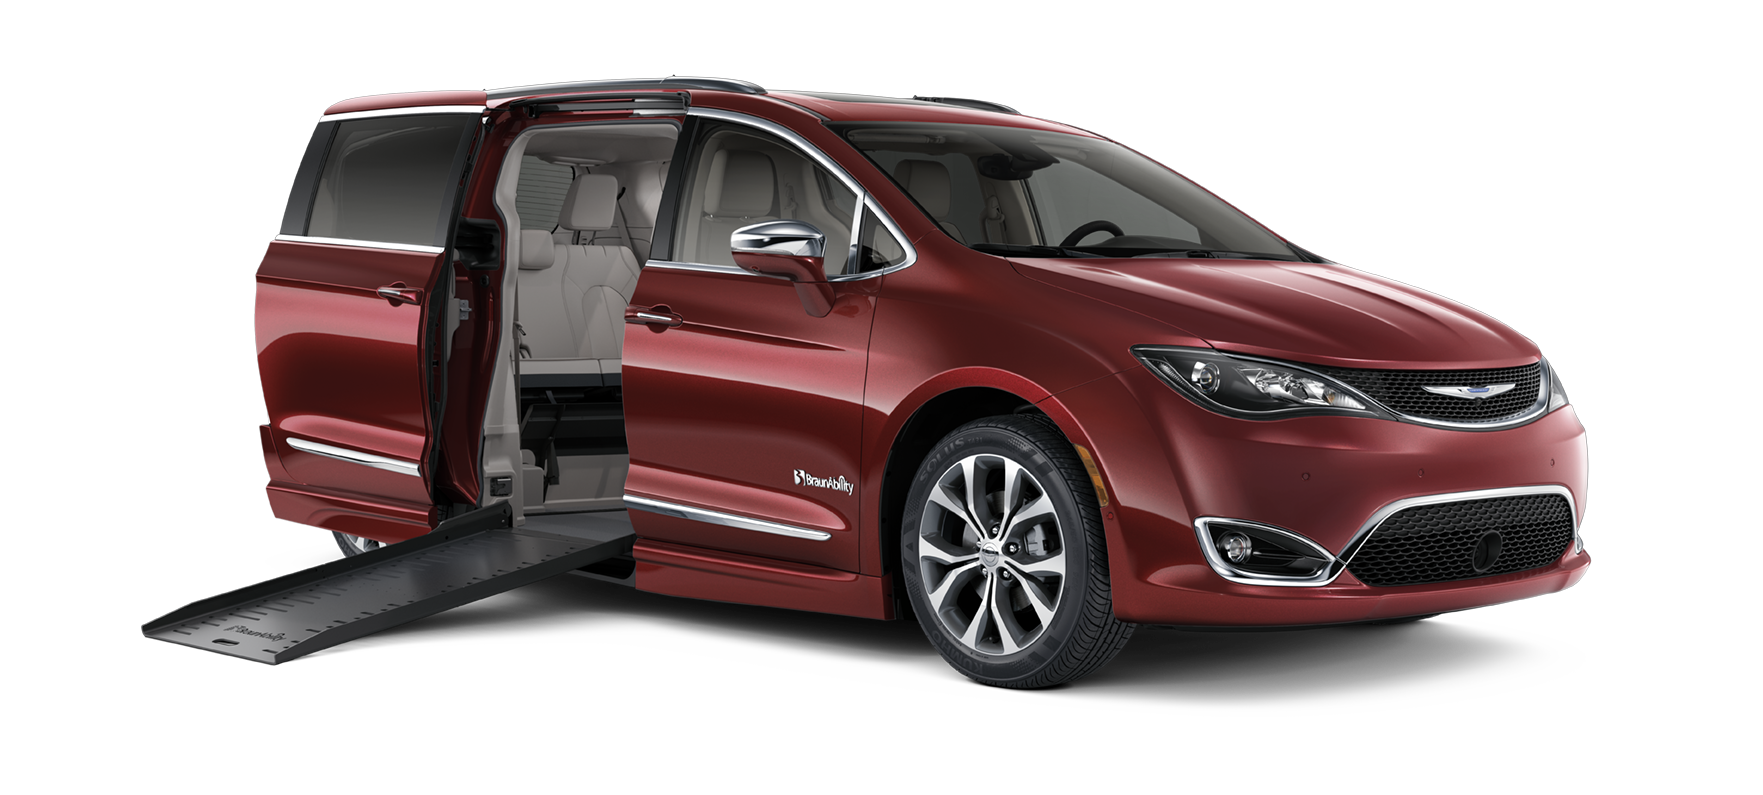 2021 Velvet Red Chrysler Voyager LXI with BraunAbility Power Foldout XT Conversion